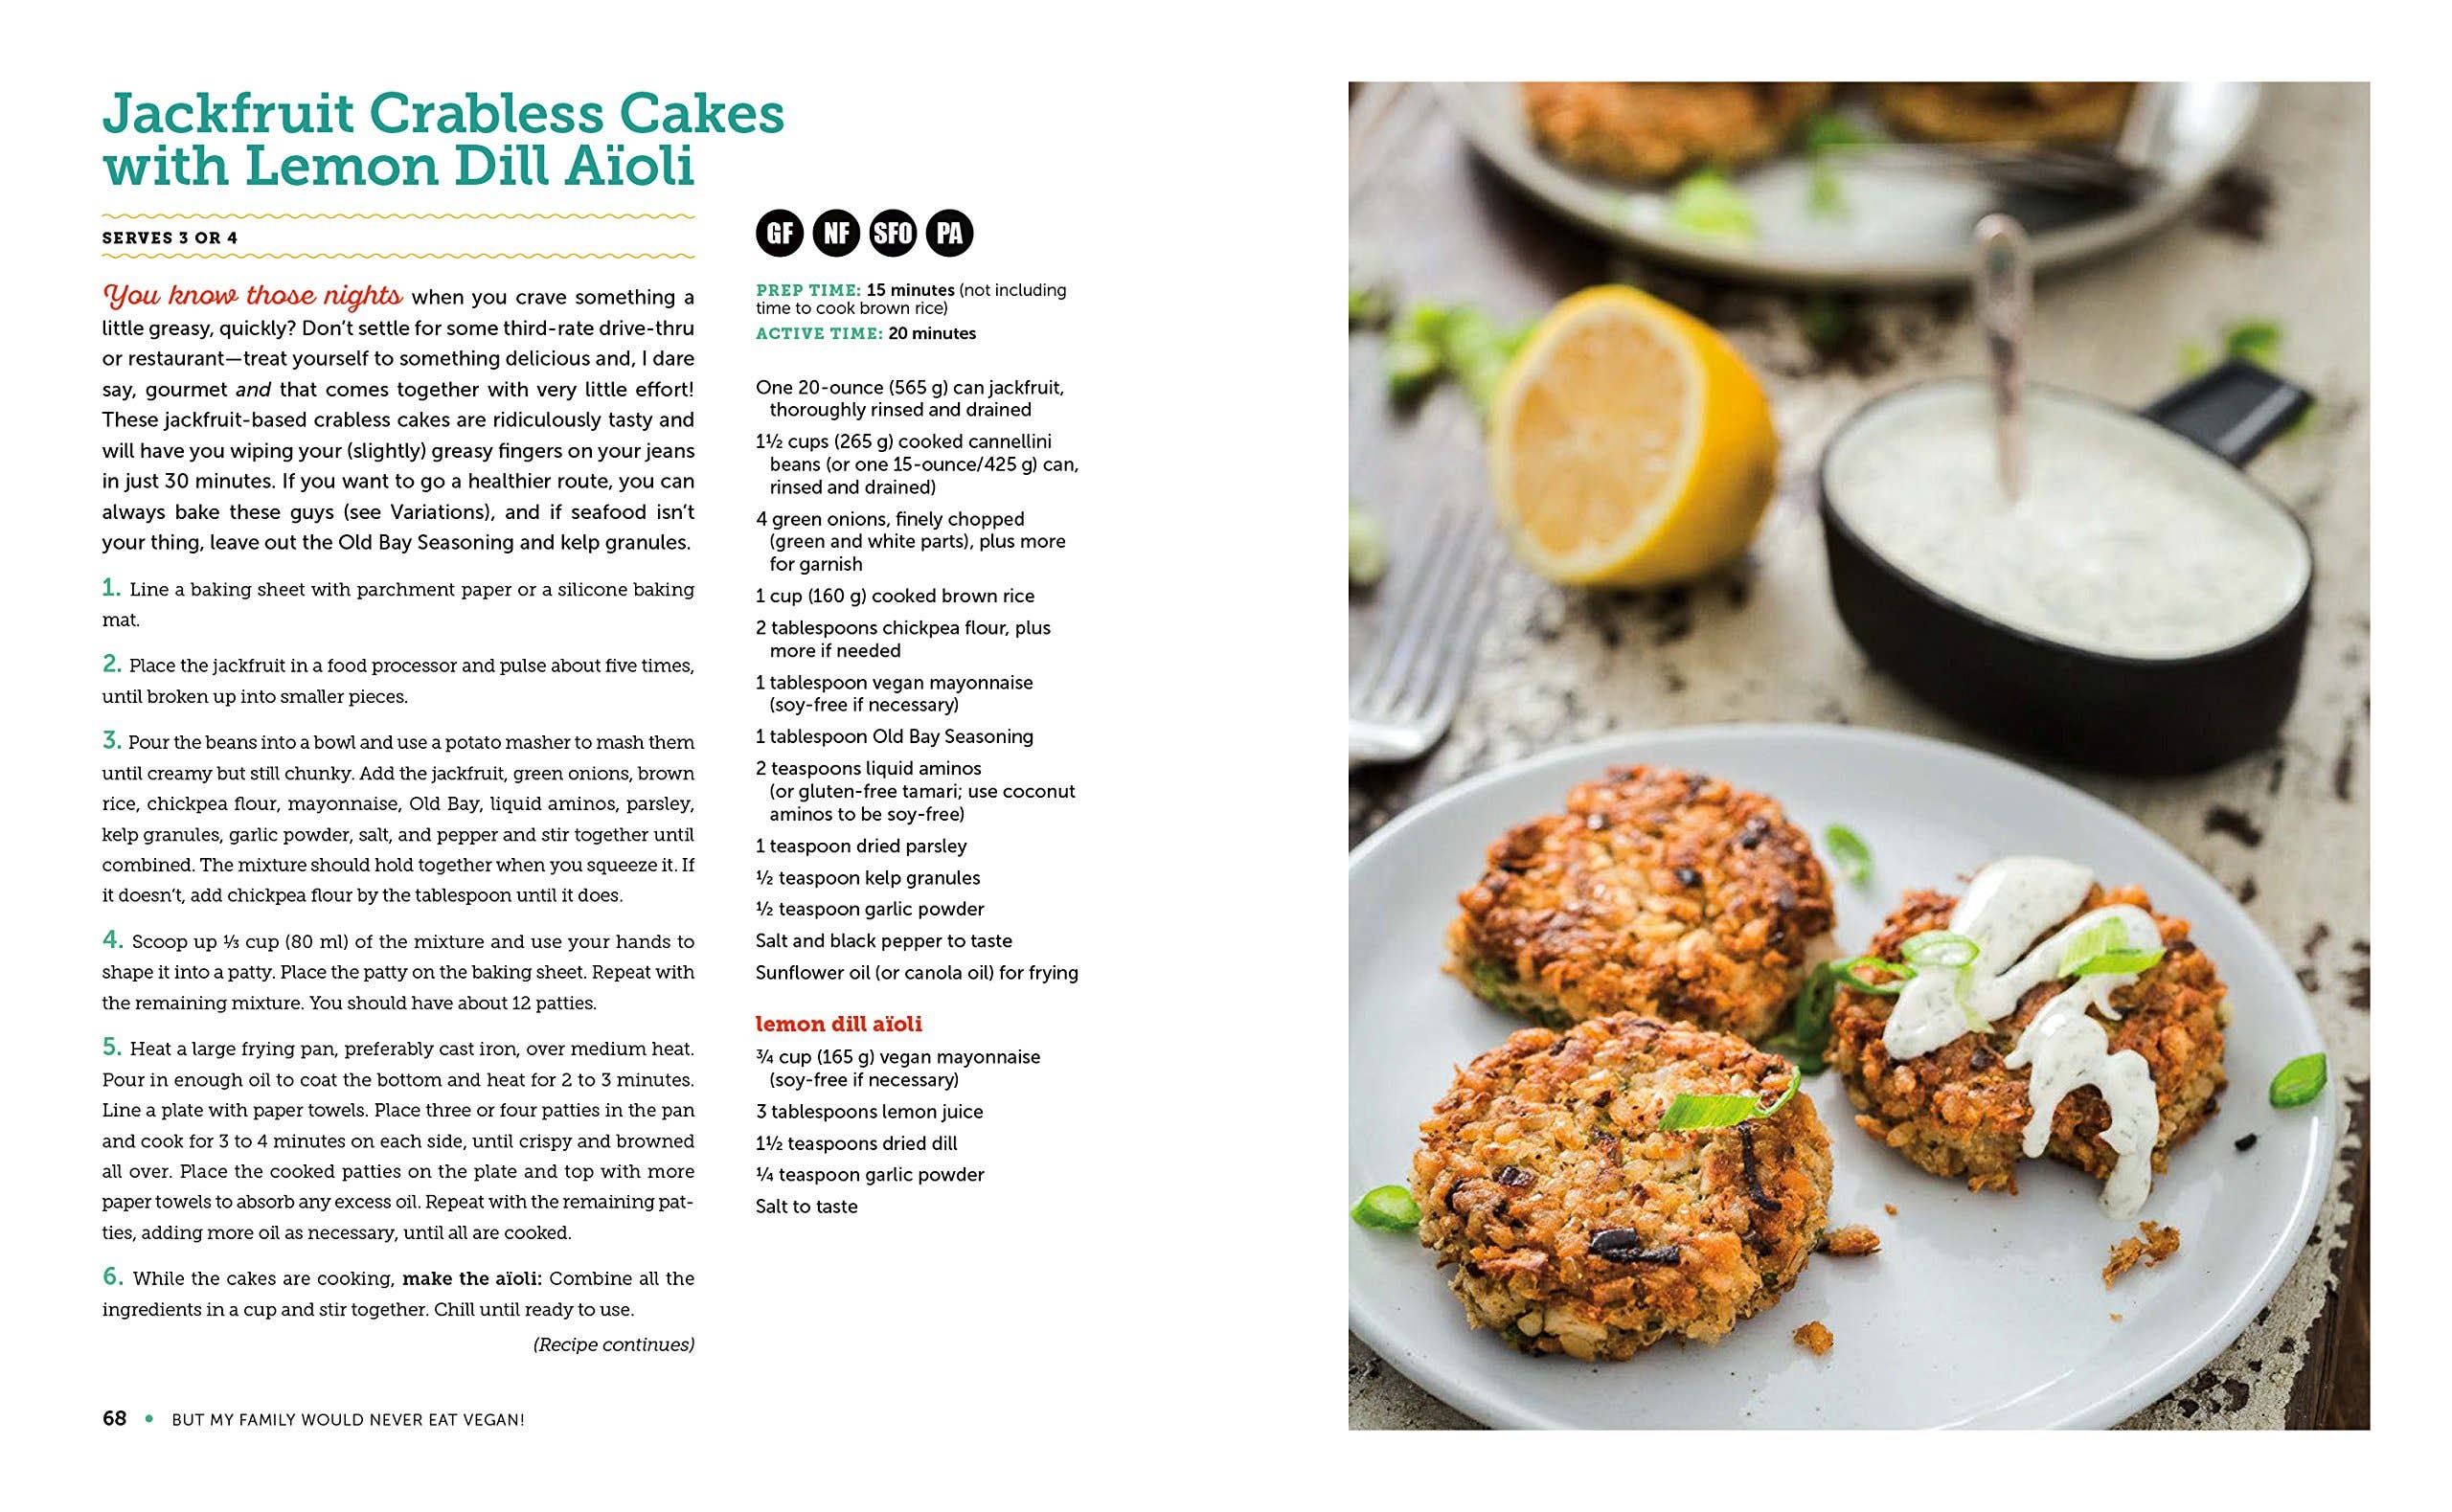 Conquer Vegan Skeptics with Delicious Recipes from 